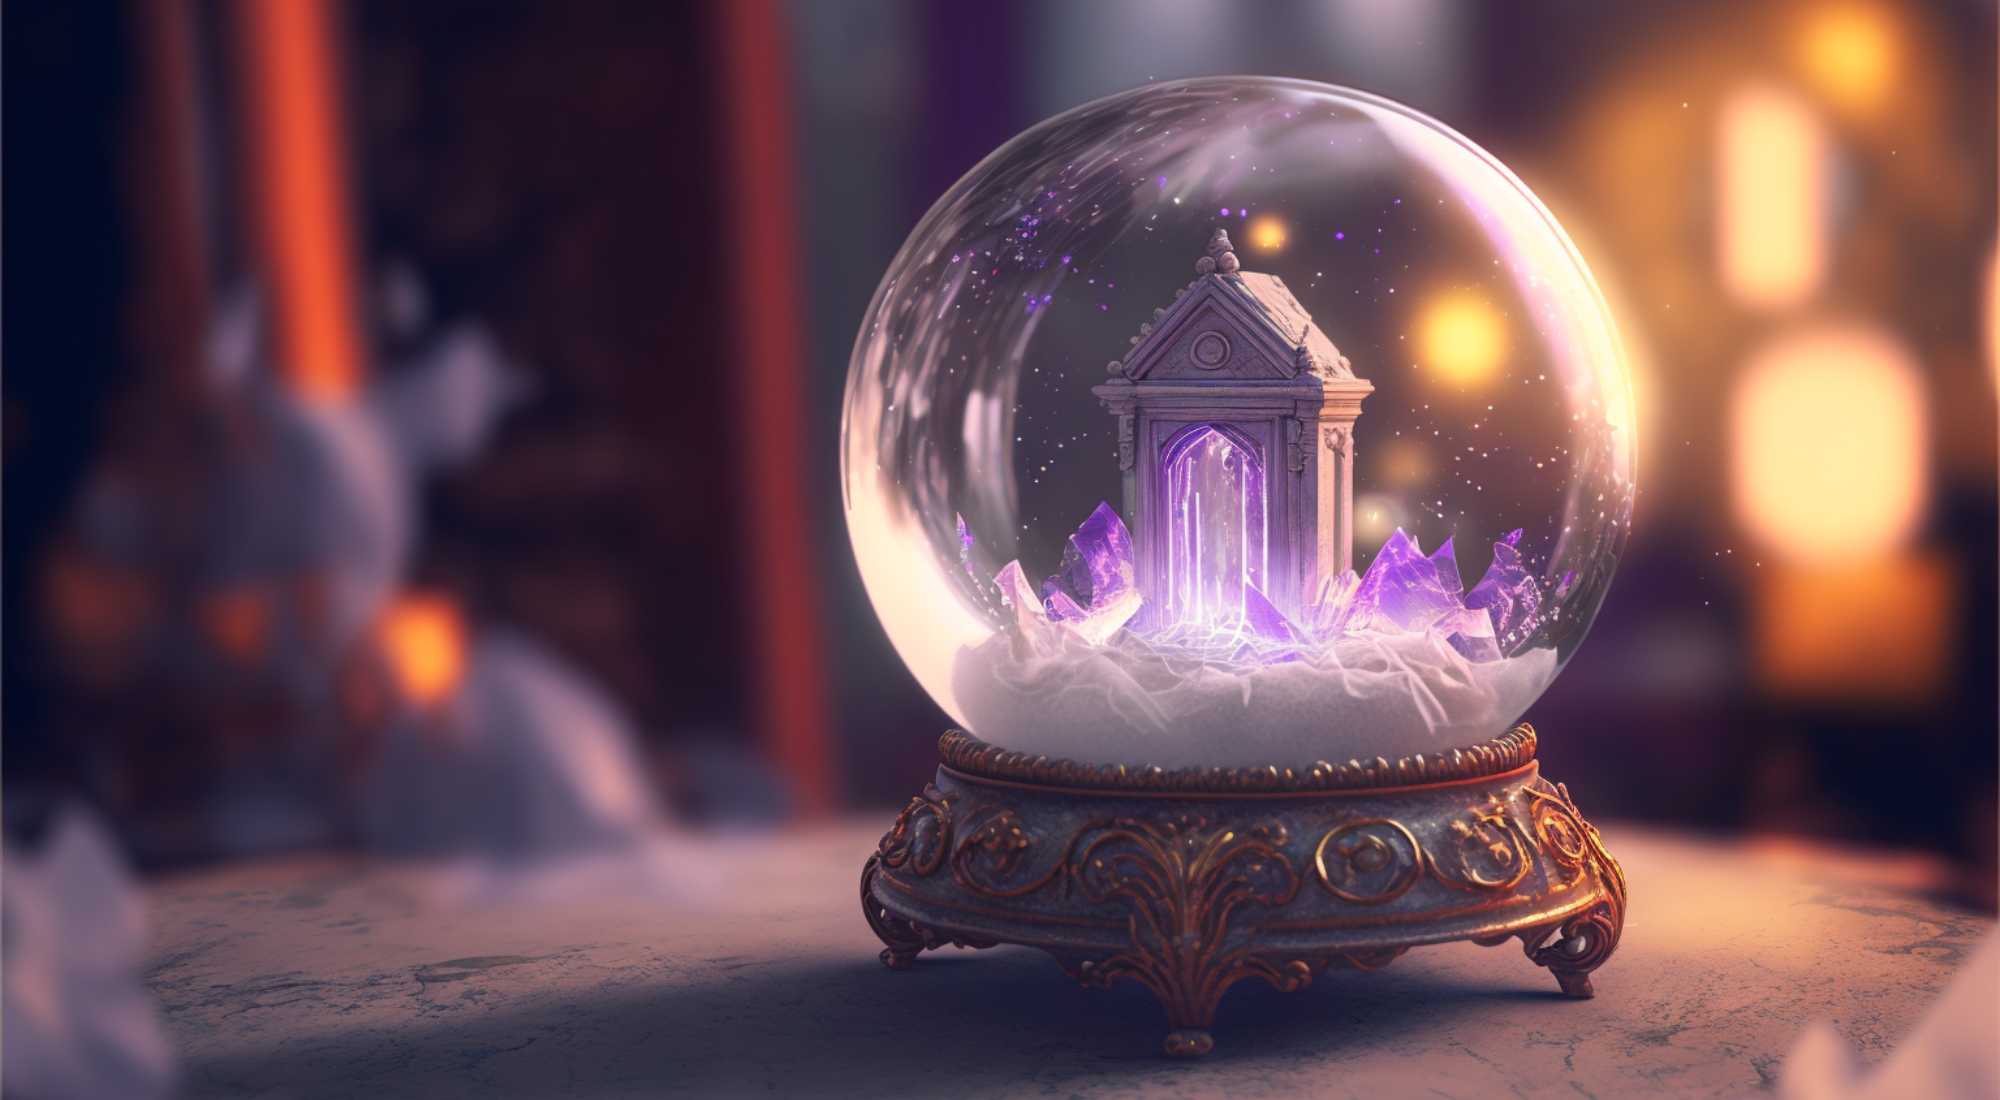 The Prophecies of the Crystal Ball - Guided Meditation